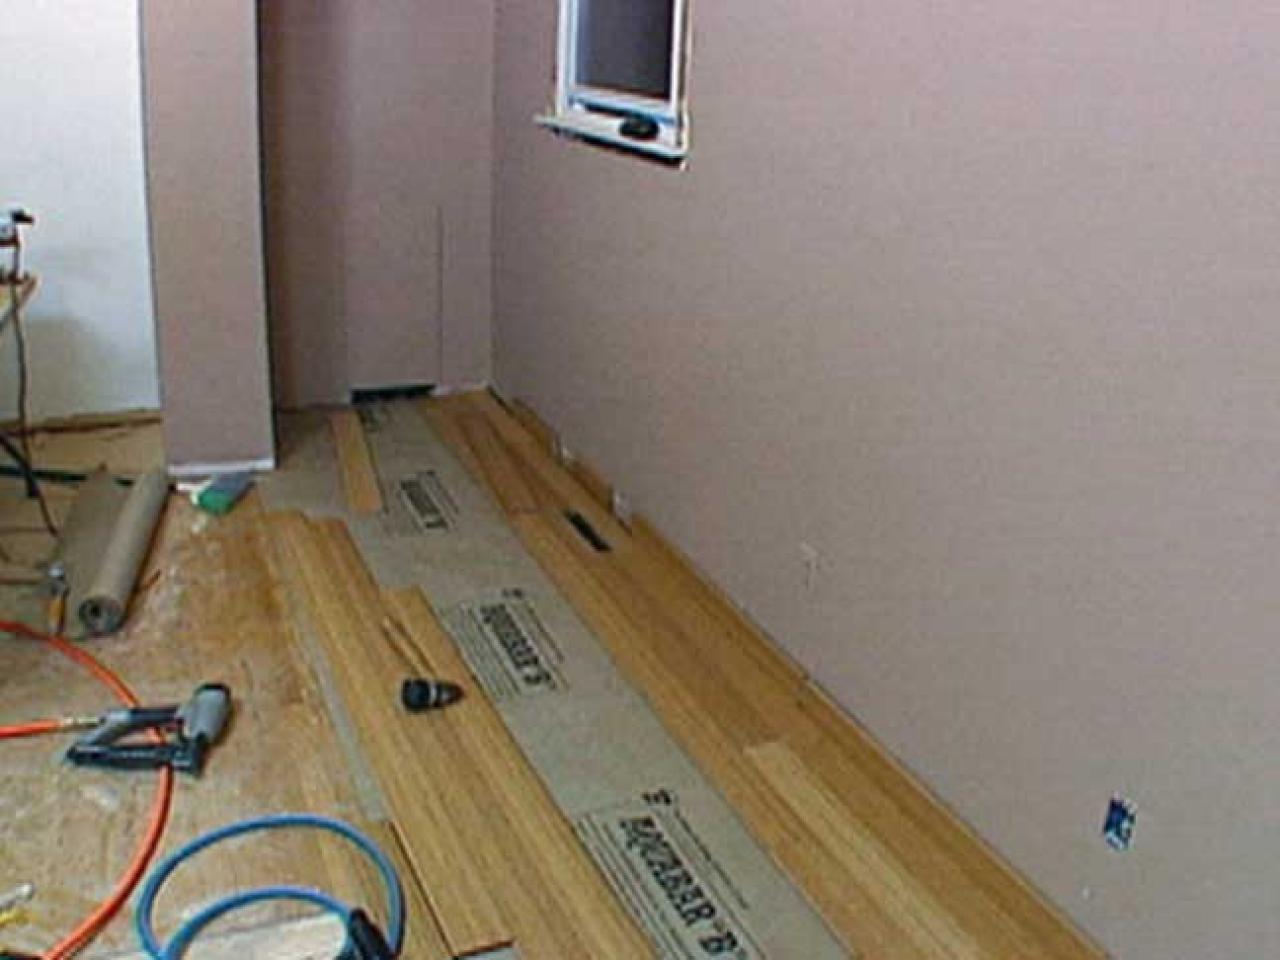 How To Install Bamboo Flooring, Is It Hard To Install Bamboo Flooring